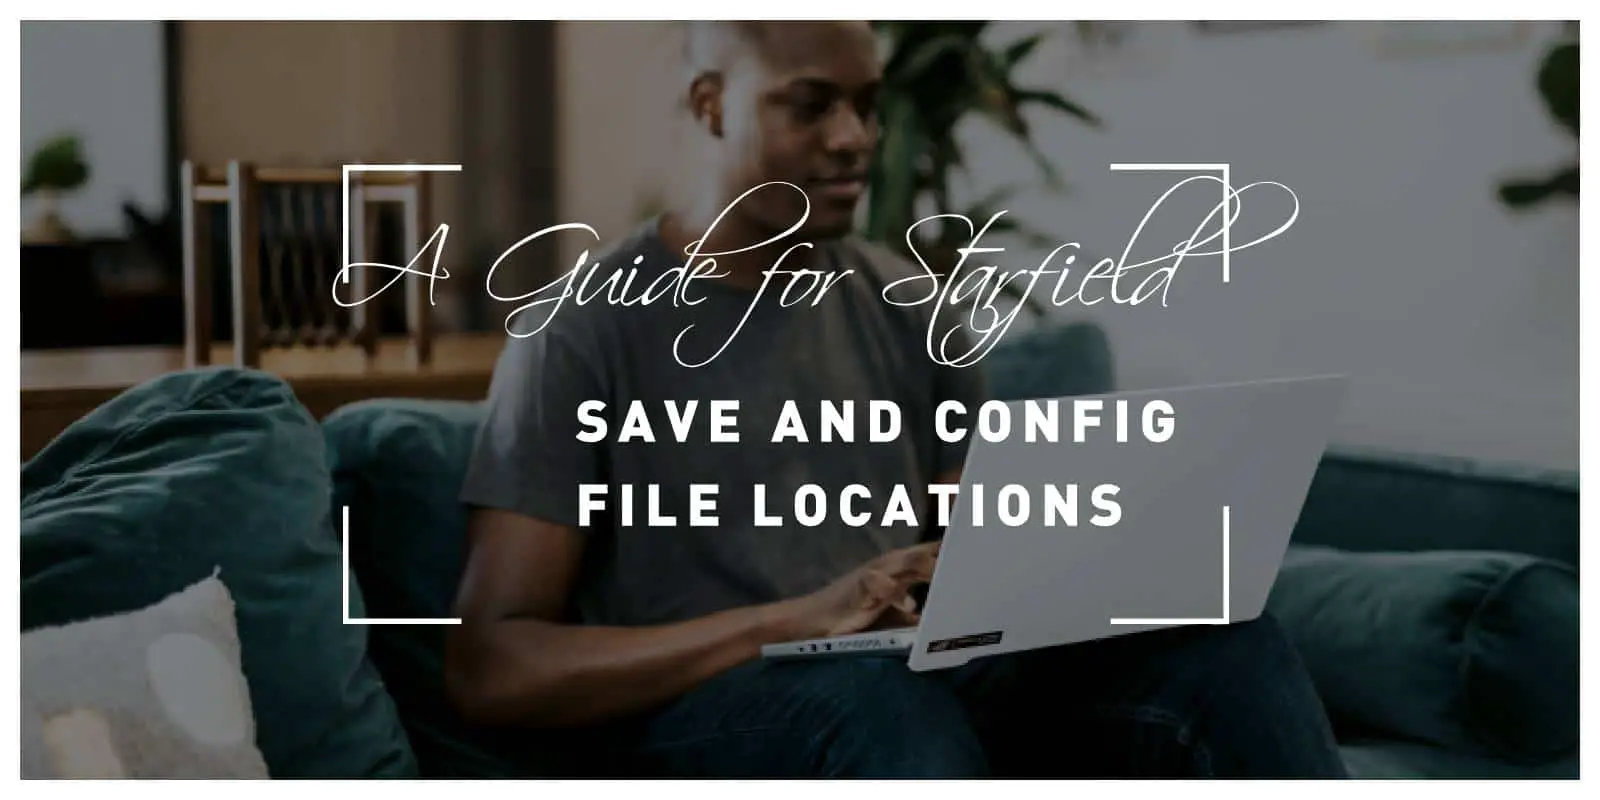 A Guide for Starfield Save and Config File Locations